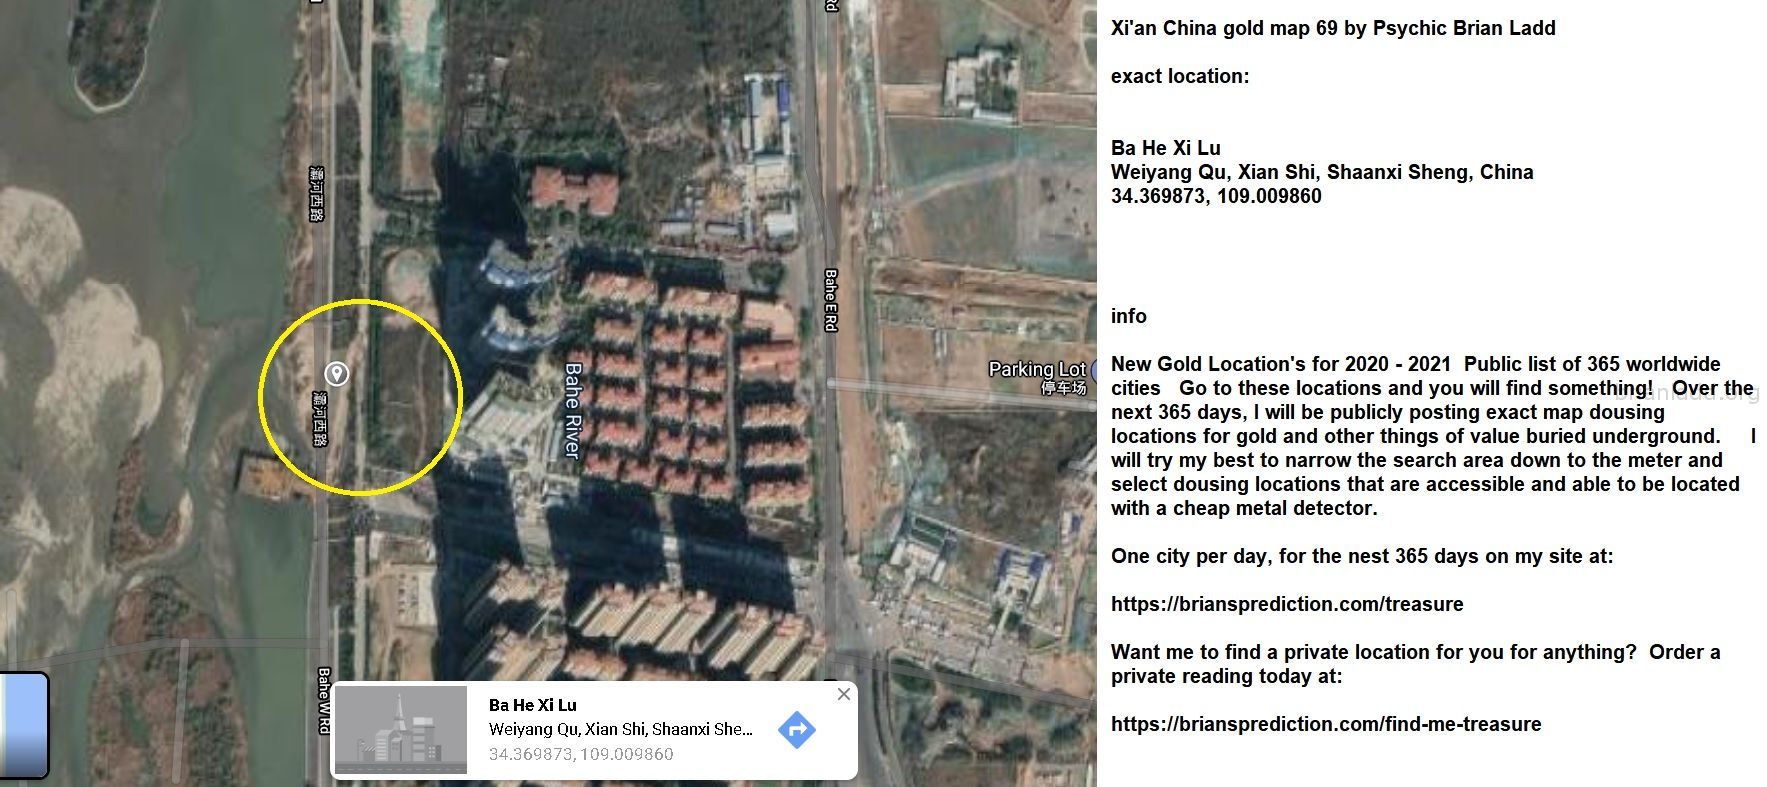 Xi An China Gold Map 69 By Psychic Brian Ladd - Xi'An China Gold Map 69 By Psychic Brian Ladd  Exact Location:  Ba ...
Xi'An China Gold Map 69 By Psychic Brian Ladd  Exact Location:  Ba He Xi Lu  Weiyang Qu, Xian Shi, Shaanxi Sheng, China  34.369873, 109.009860  Info  New Gold Location'S For 2020 - 2021  Public List Of 365 Worldwide Cities  Go To These Locations And You Will Find Something!  Over The Next 365 Days, I Will Be Publicly Posting Exact Map Dousing Locations For Gold And Other Things Of Value Buried Underground.  I Will Try My Best To Narrow The Search Area Down To The Meter And Select Dousing Locations That Are Accessible And Able To Be Located With A Cheap Metal Detector.  One City Per Day, For The Nest 365 Days On My Site At:   https://briansprediction.com/Treasure  Want Me To Find A Private Location For You For Anything?  Order A Private Reading Today At:   https://briansprediction.com/Find-Me-Treasure
